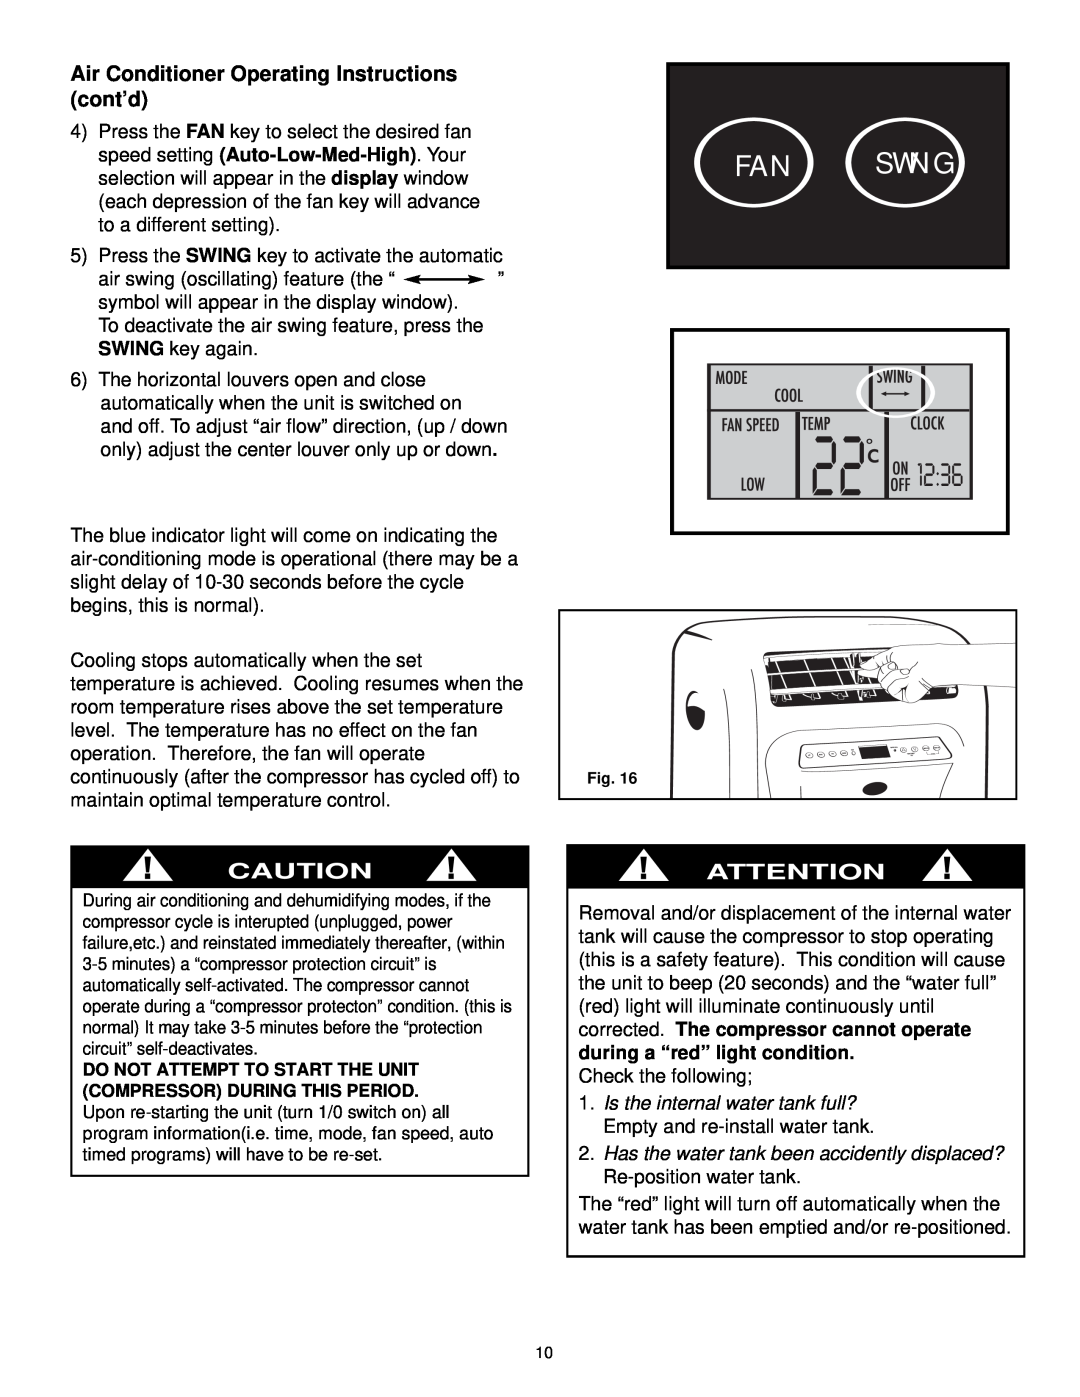 Danby DCAP 12030, DPAC9030 manual Fan Swing, Air Conditioner Operating Instructions cont’d 